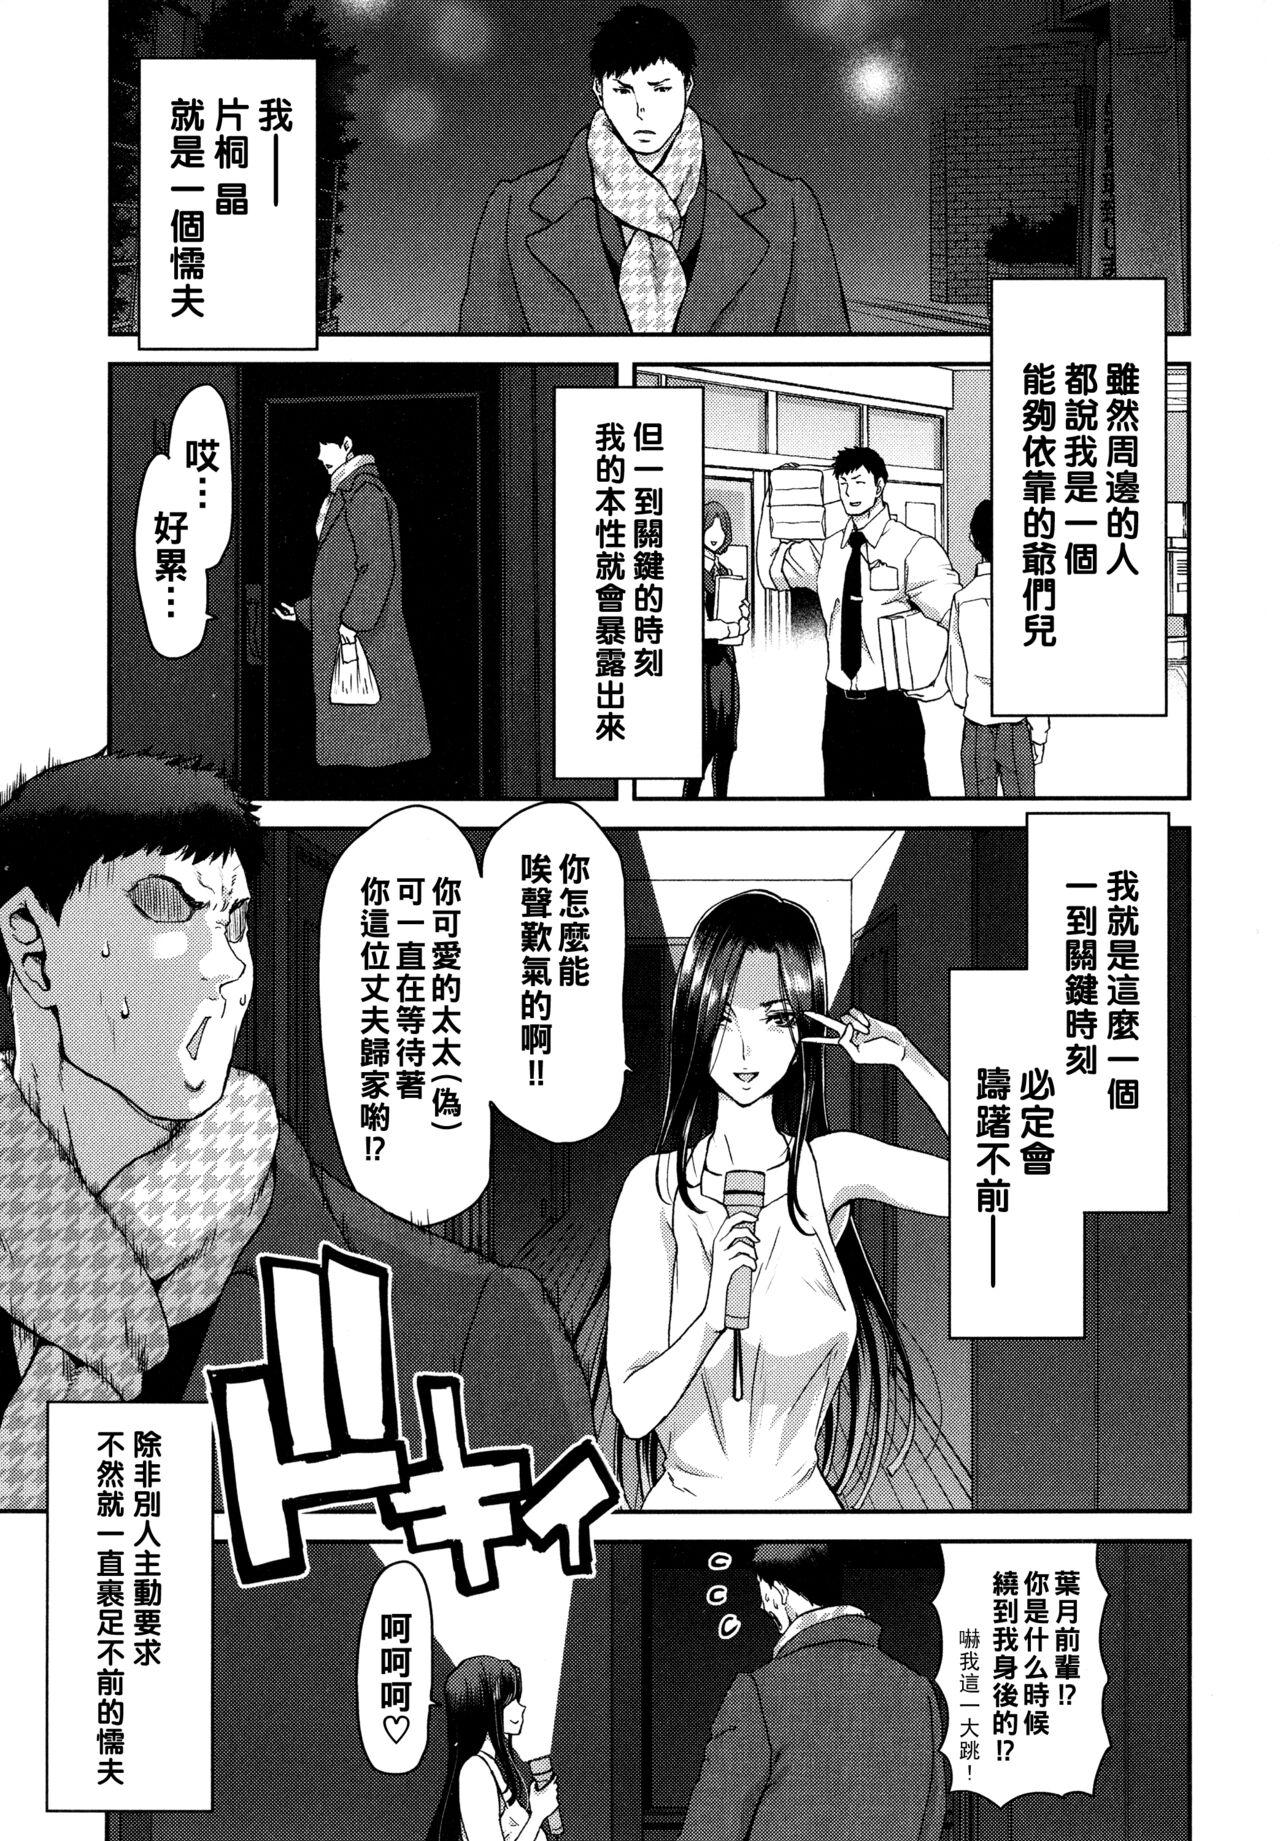 Spanish Iede Onna o Hirottara - When I picked up a runaway girl. Petera - Page 5